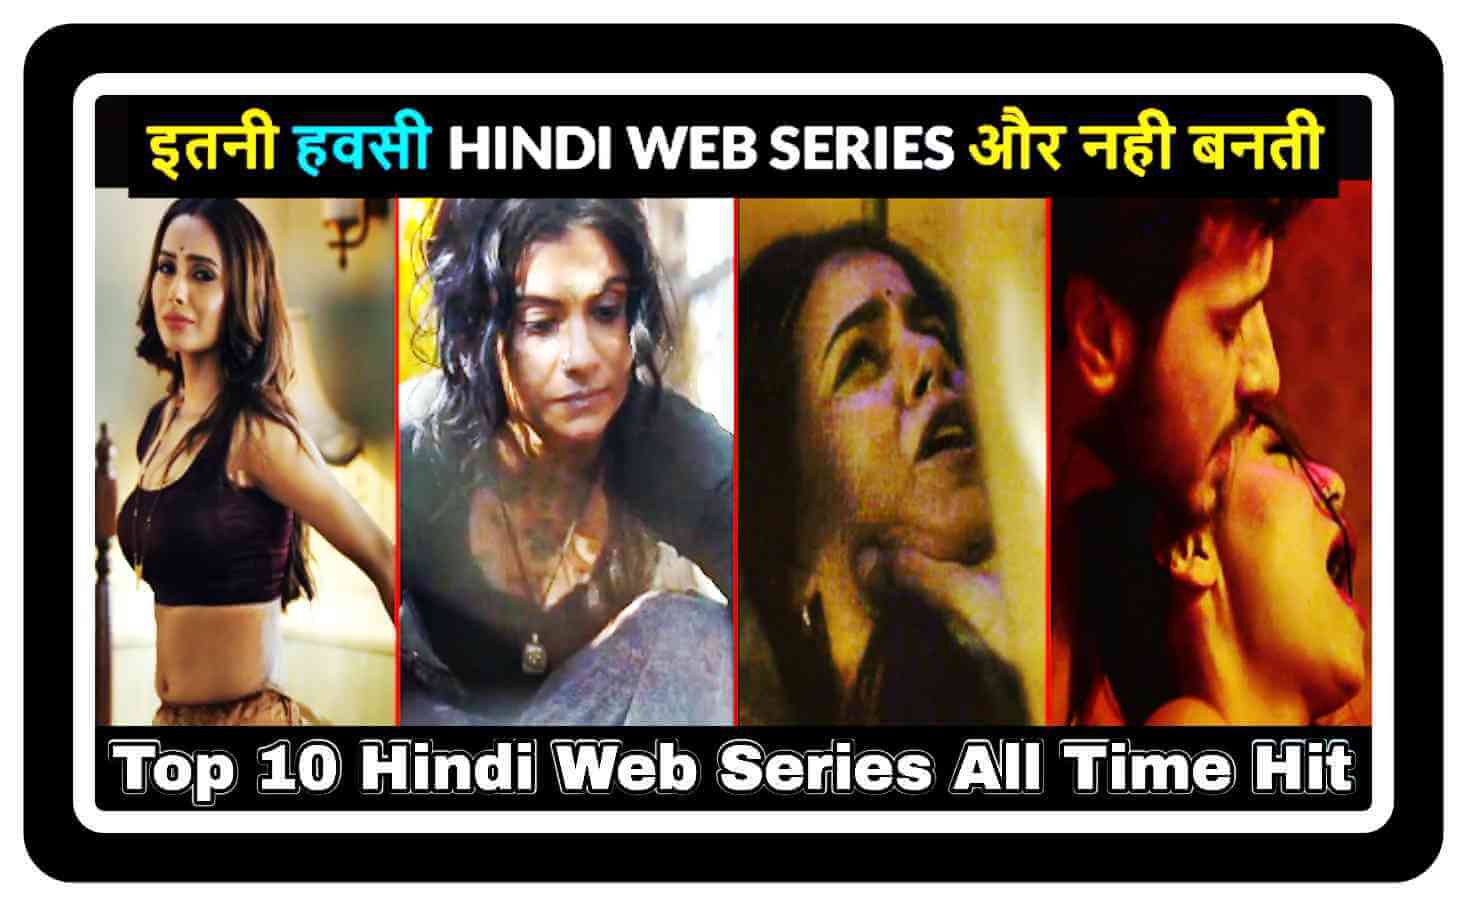 Which are Top 10 Hindi Web Series All Time Hit